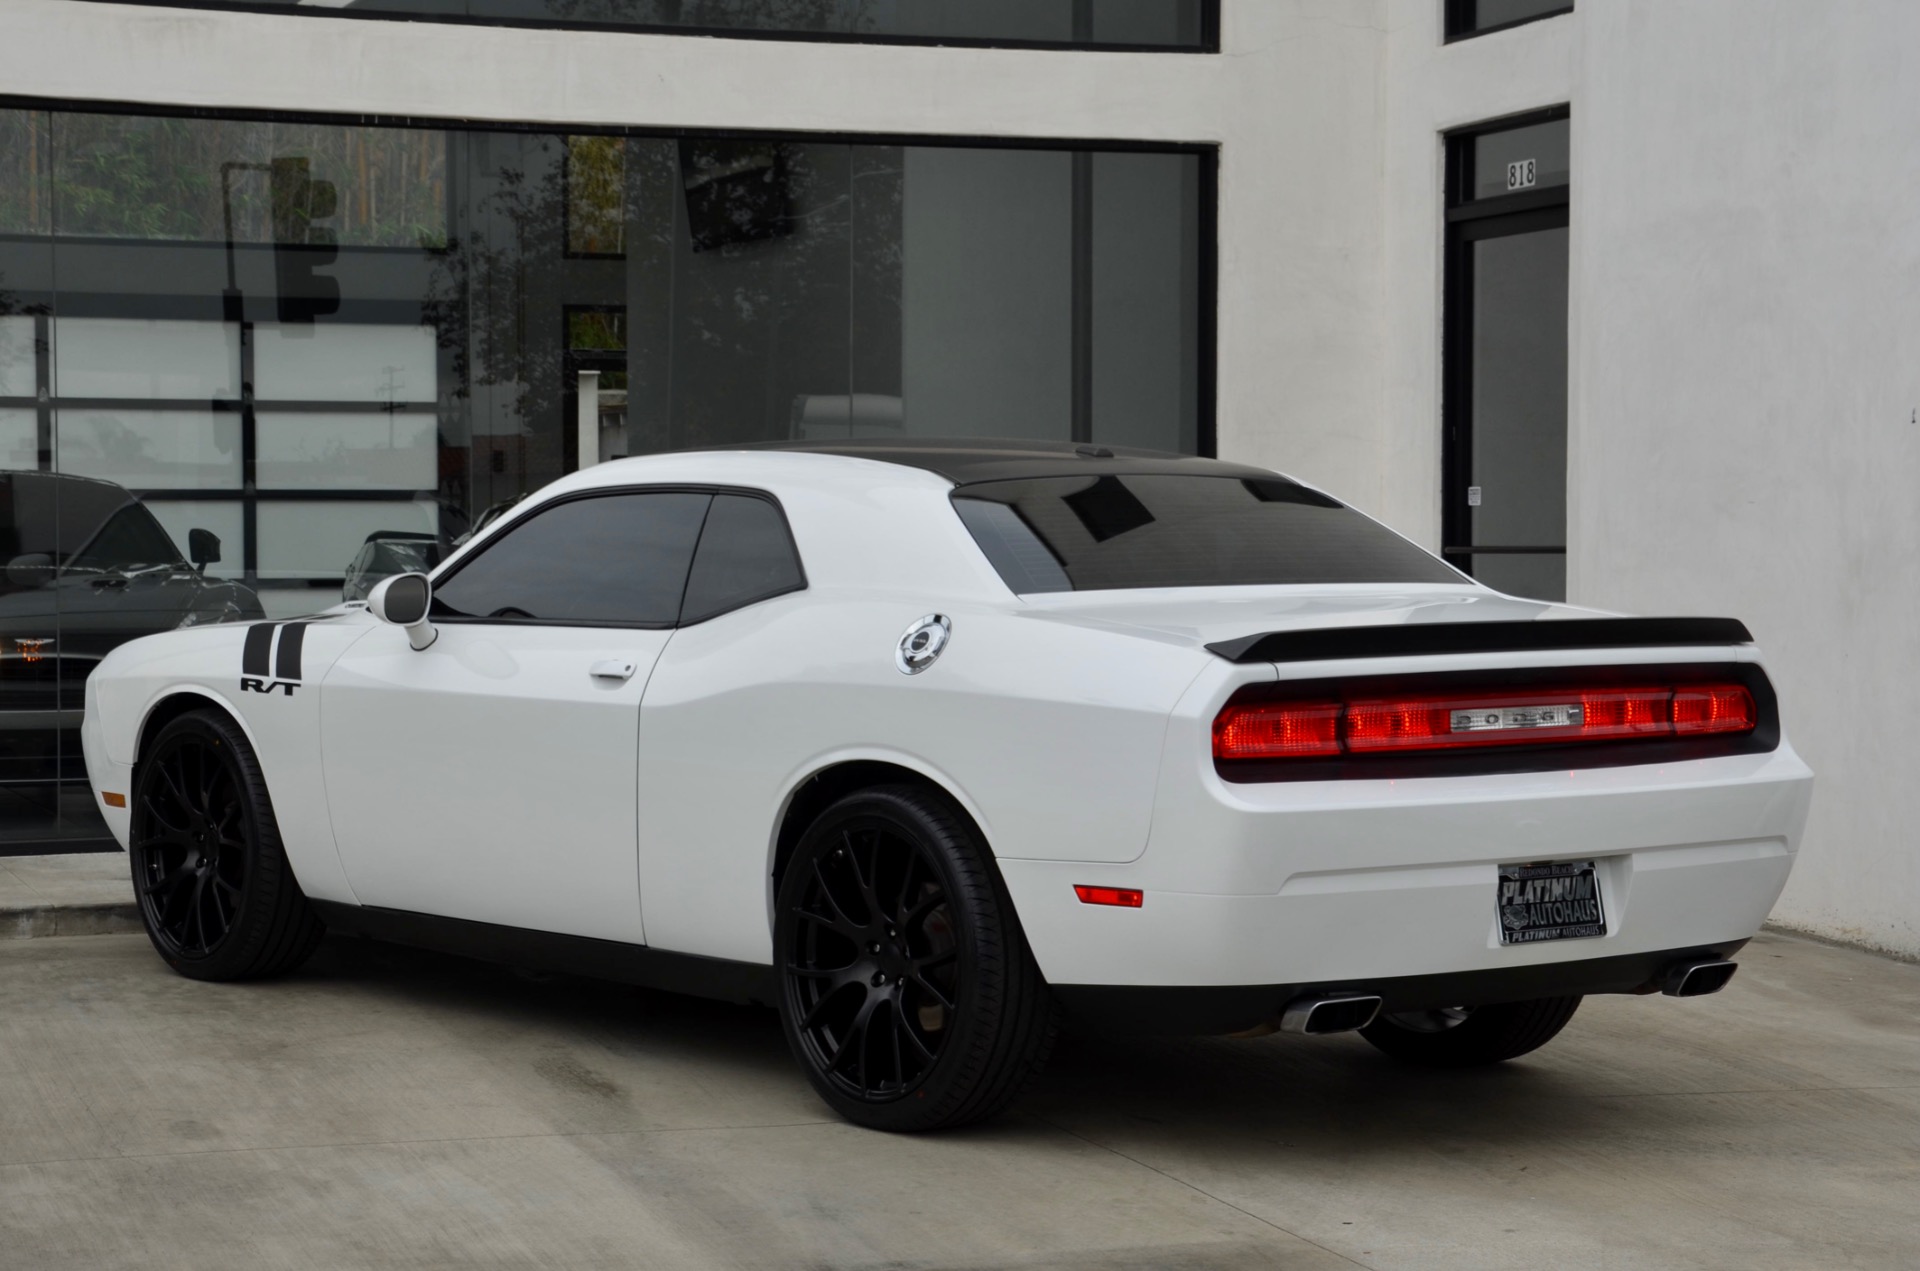 2013 Dodge Challenger R/T Stock # 7564A for sale near Redondo 